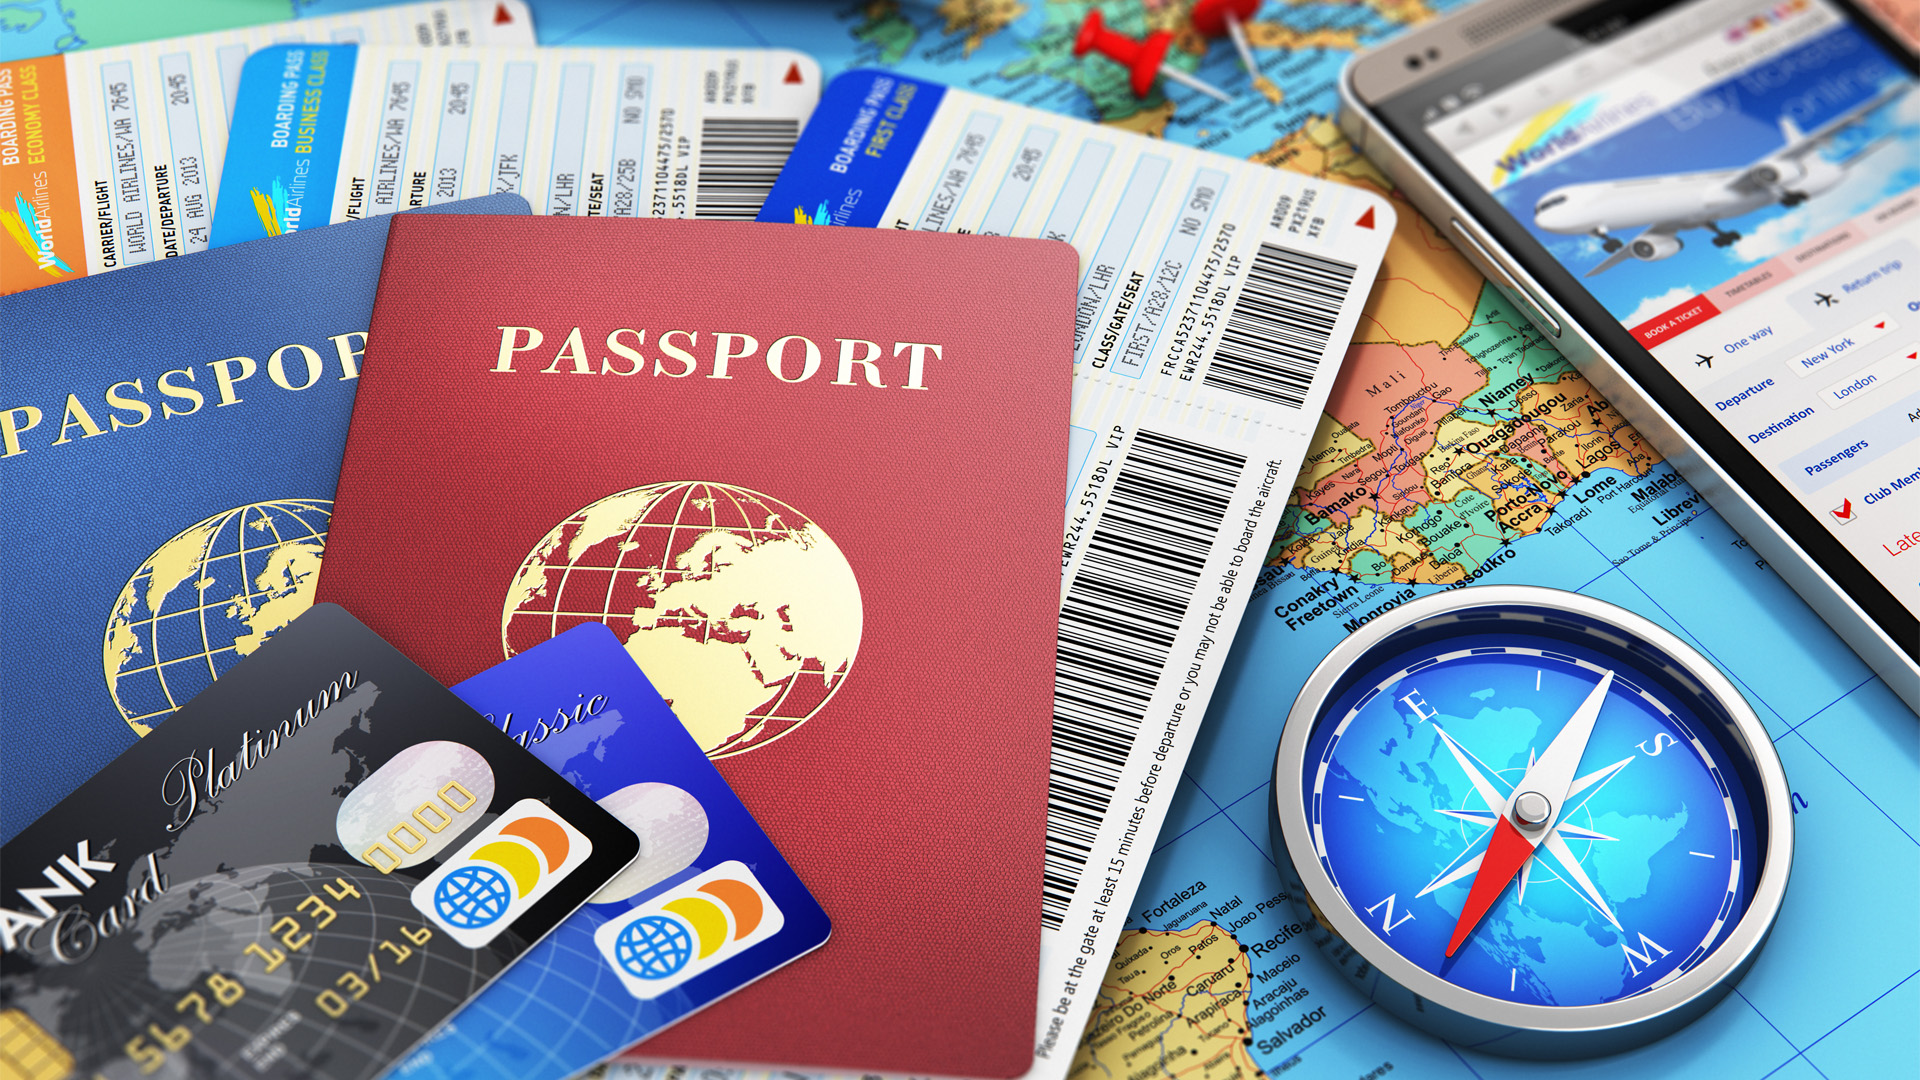 Travel picture with passports, airline tickets, cell phone with travel instructions and a map background and compass.